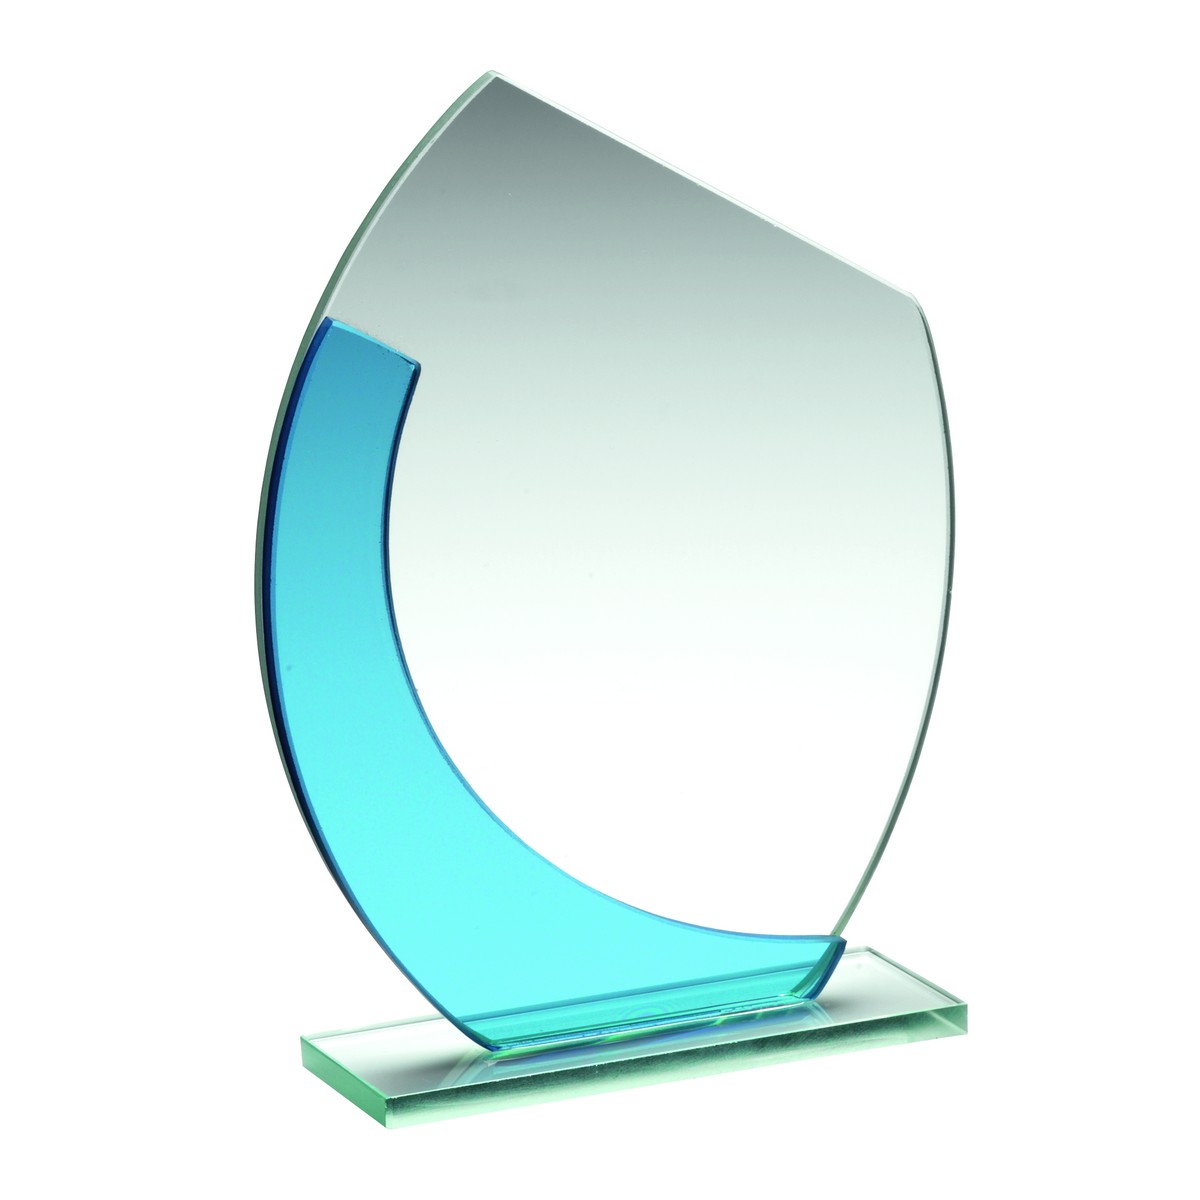 JADE/BLUE GLASS OVAL PLAQUE WITH ANGLED TOP (5MM THICK)